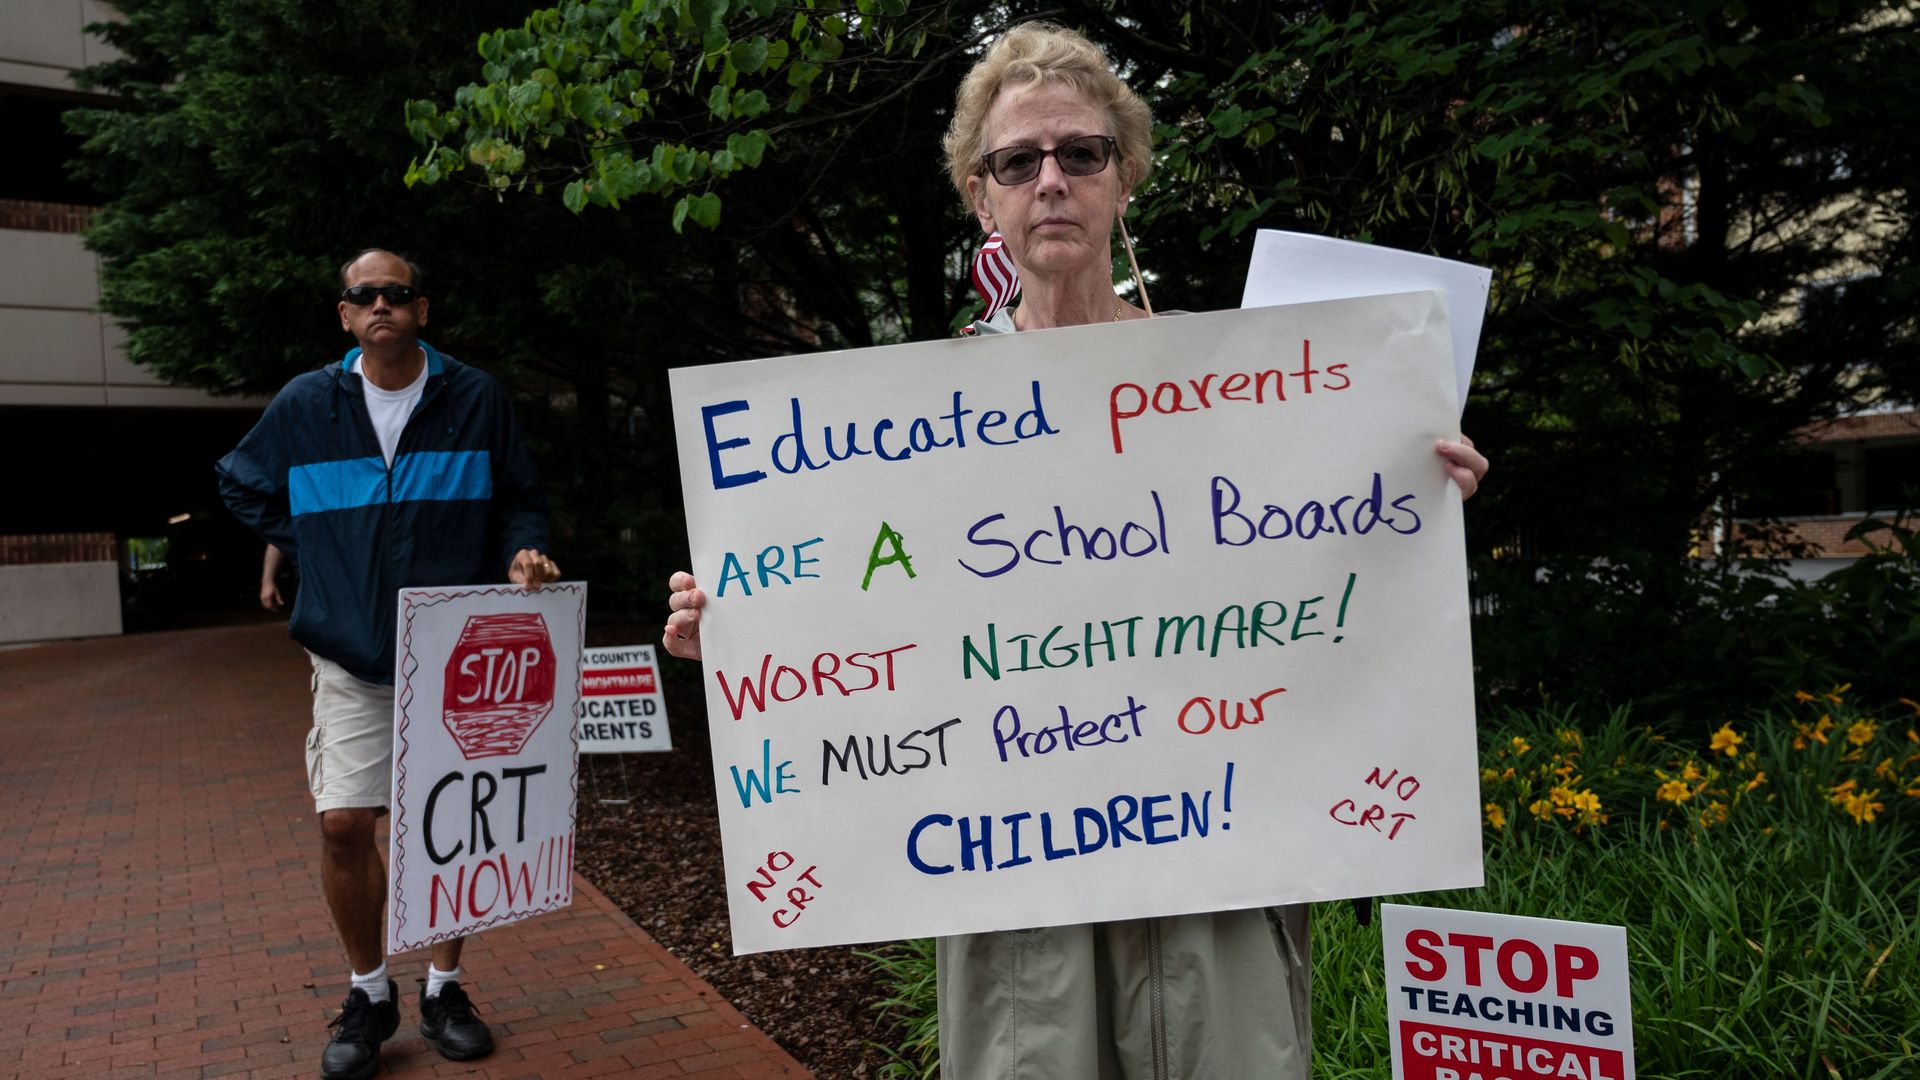 People hold up signs during a rally against "critical race theory" (CRT) being taught in schools at the Loudoun County Government center in Leesburg, Virginia.